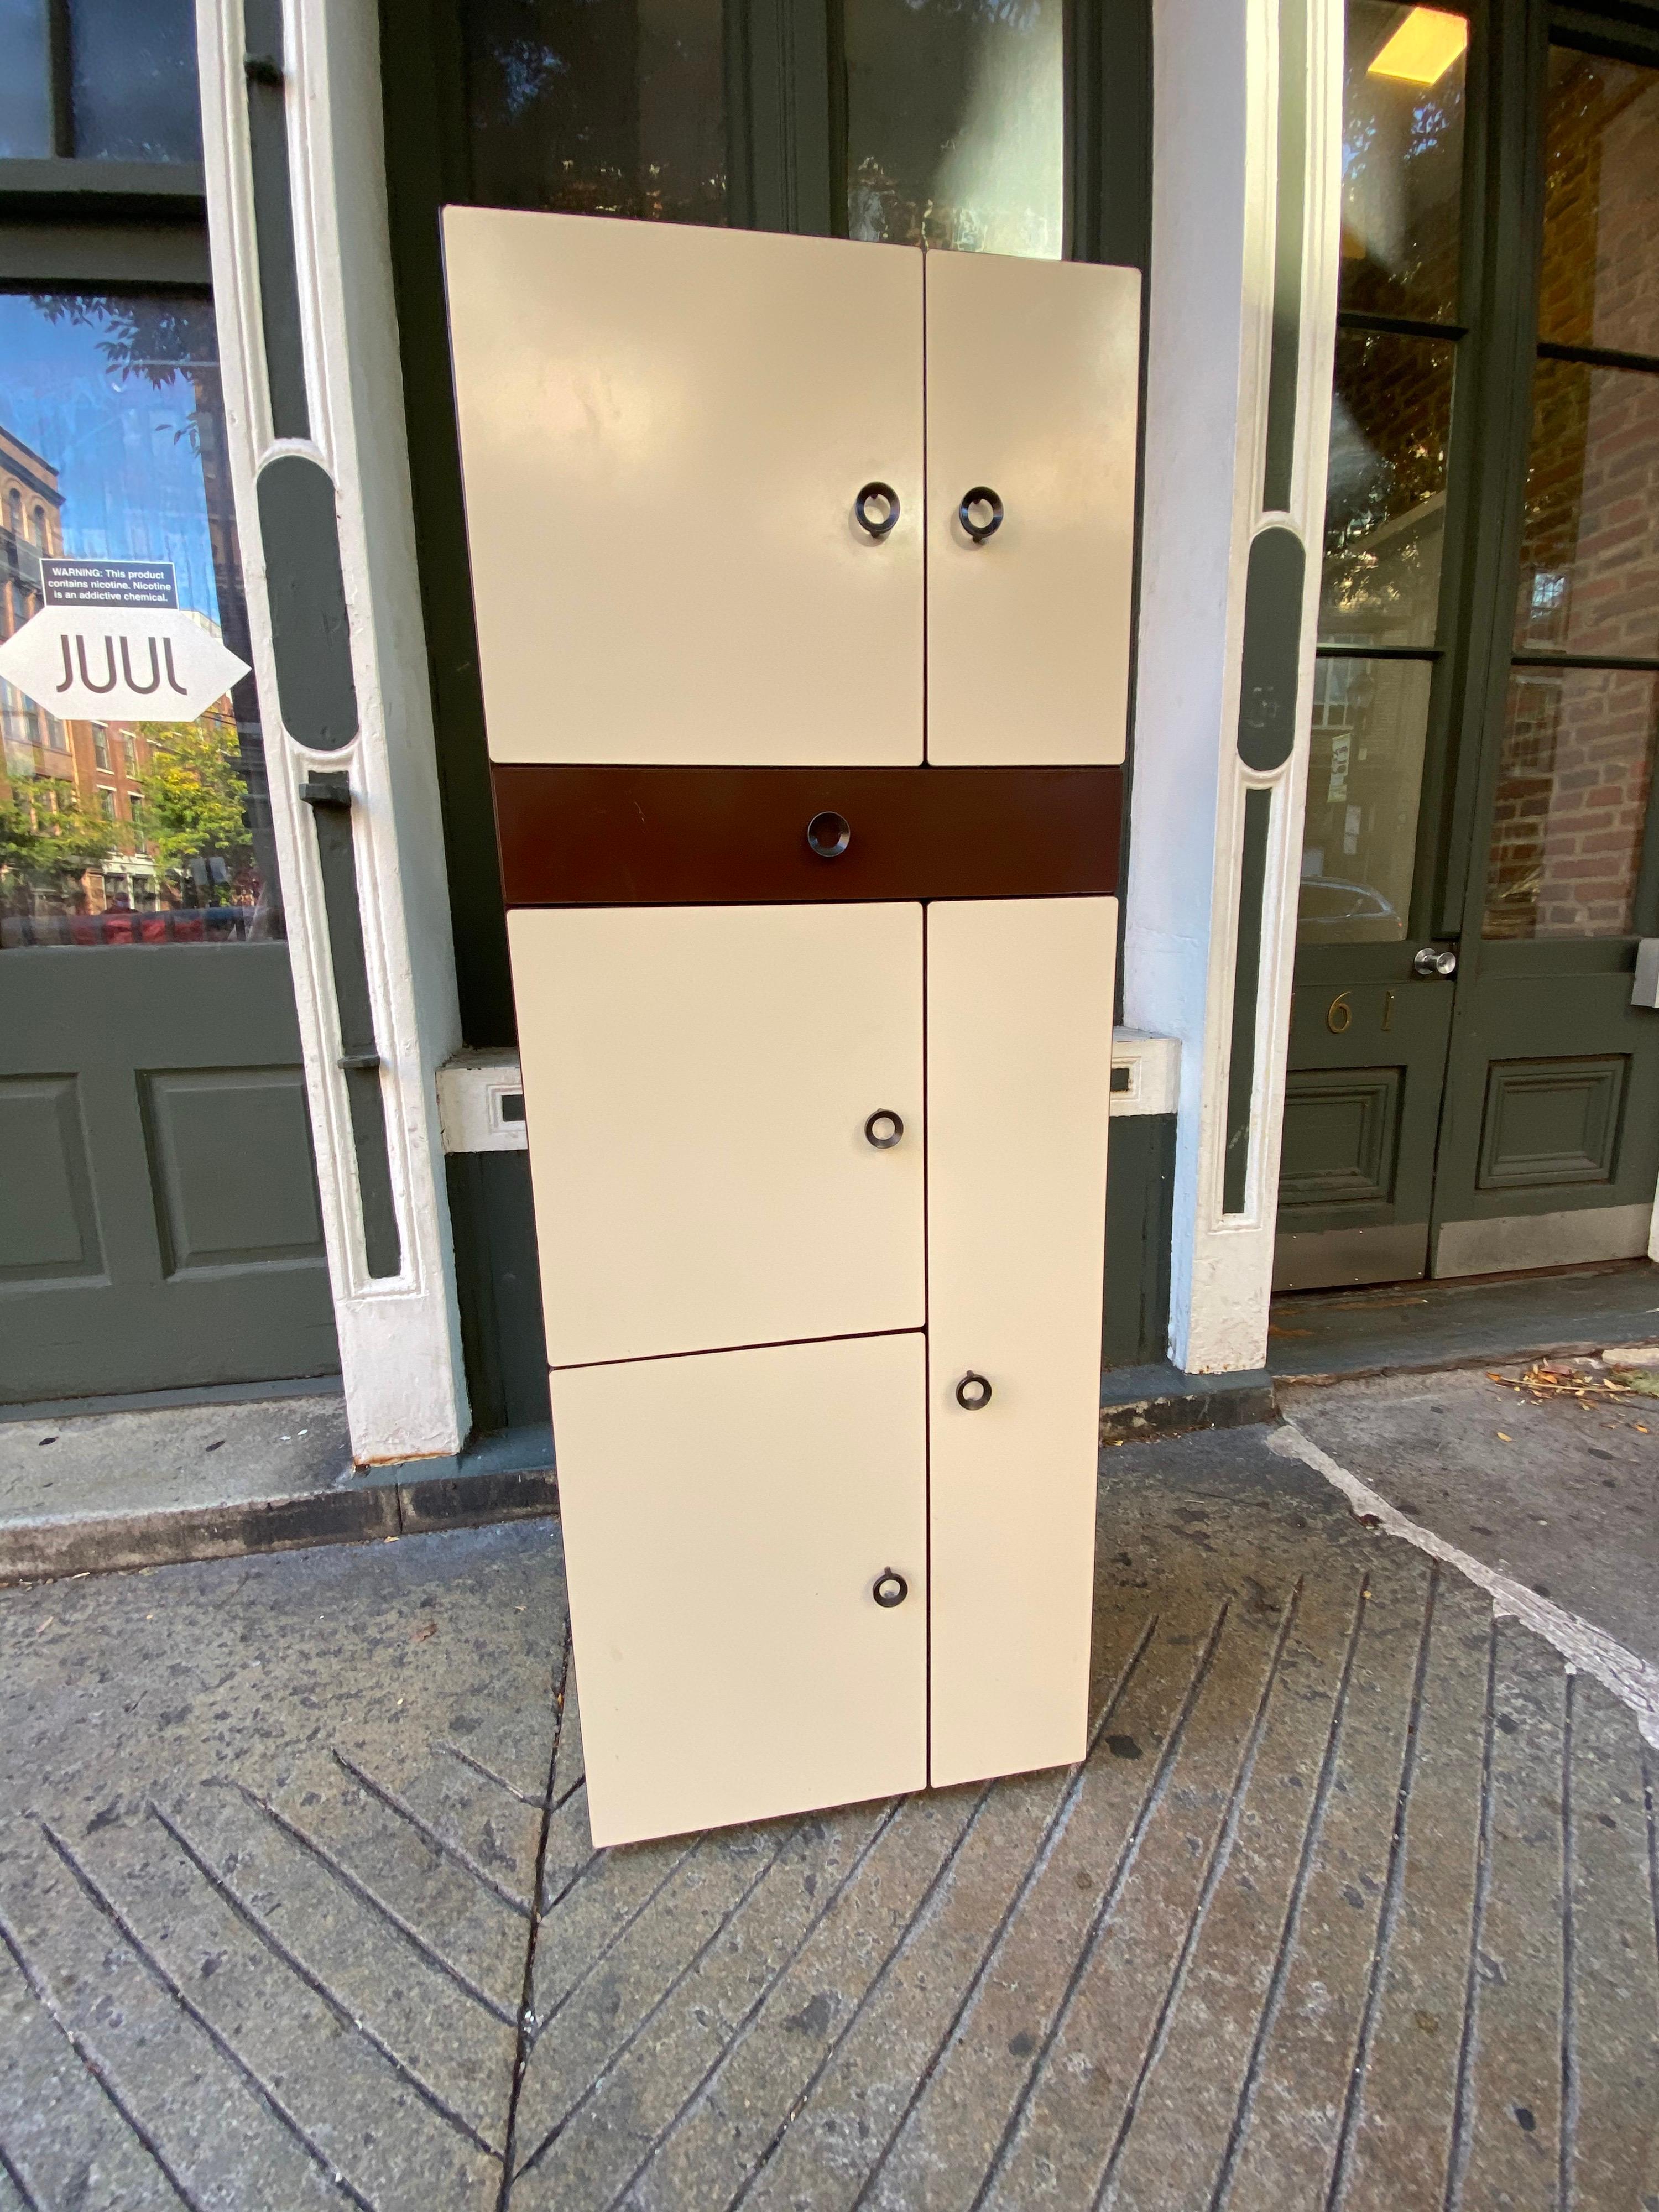 Shallow cabinet with both small chrome feet and hooks to hang from wall. Possibly German or Italian by Design. Unique door design opens to reveal the other half of a shelf! Formica like surface with rubber ends. Overall nice condition and great